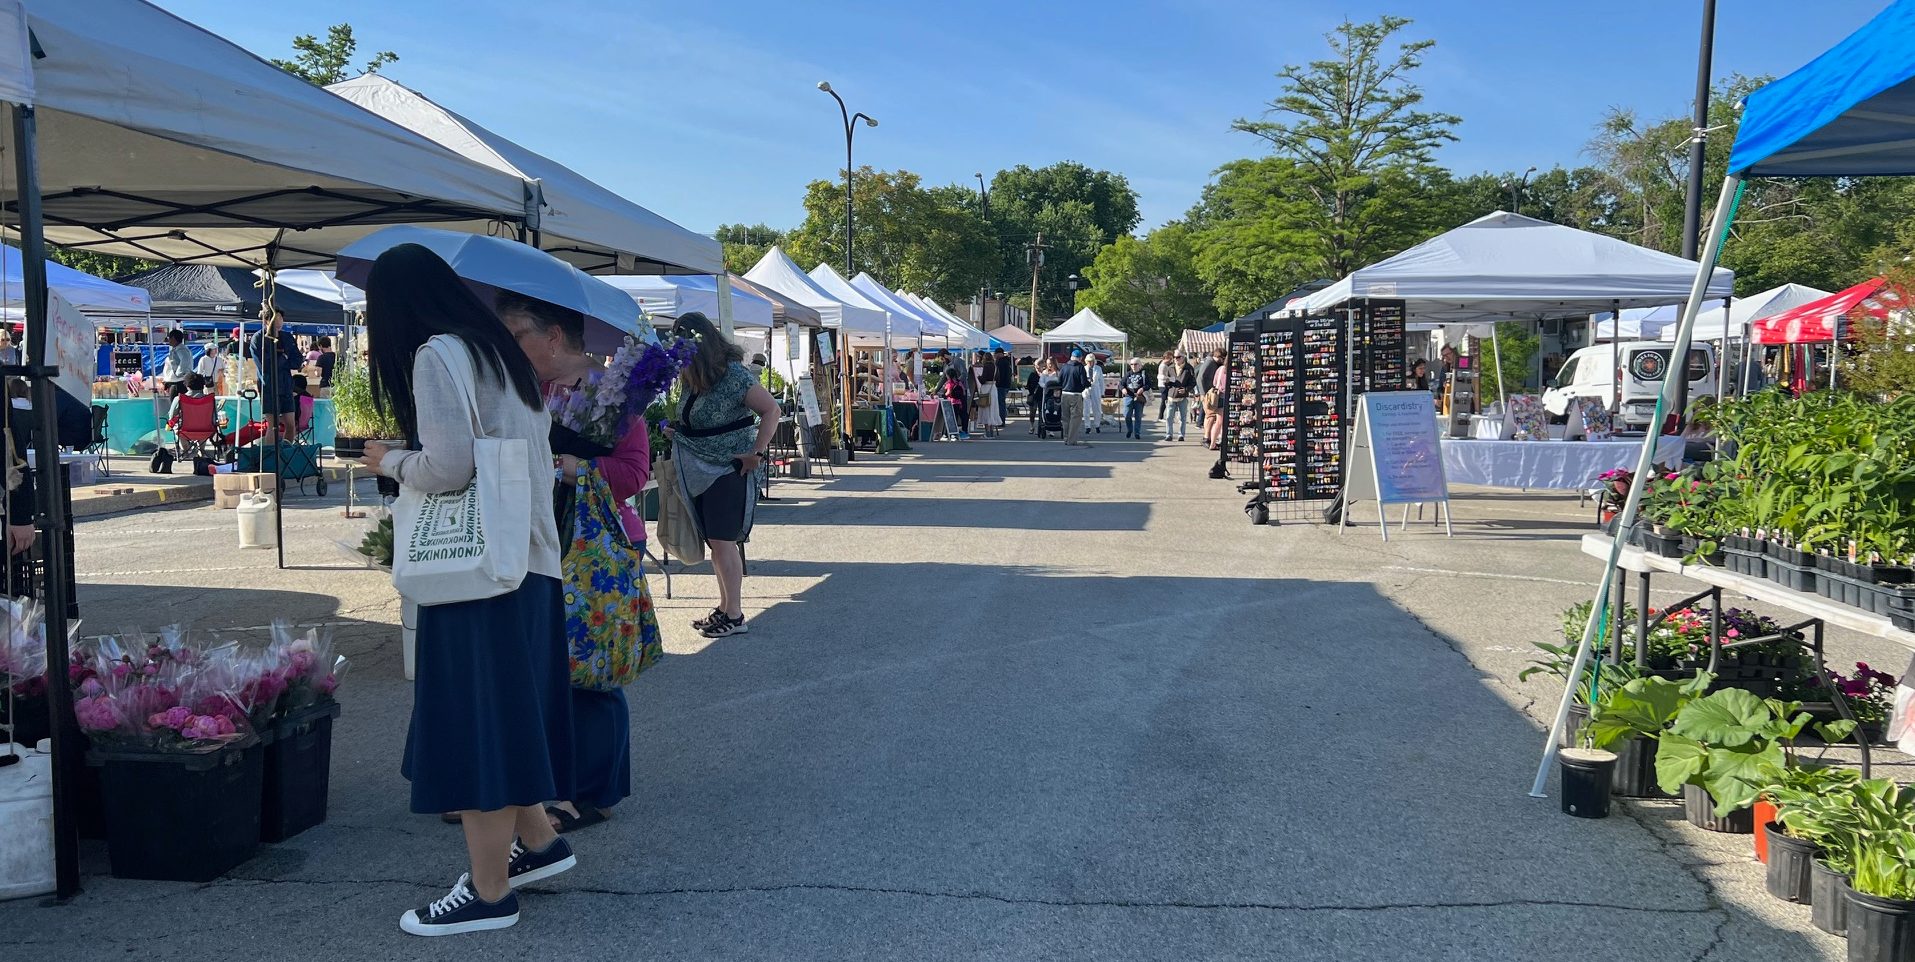 The Urbana market has several shoppers looking at flowers, food, and art for sale in the parking lot on a sunny blue skied day.